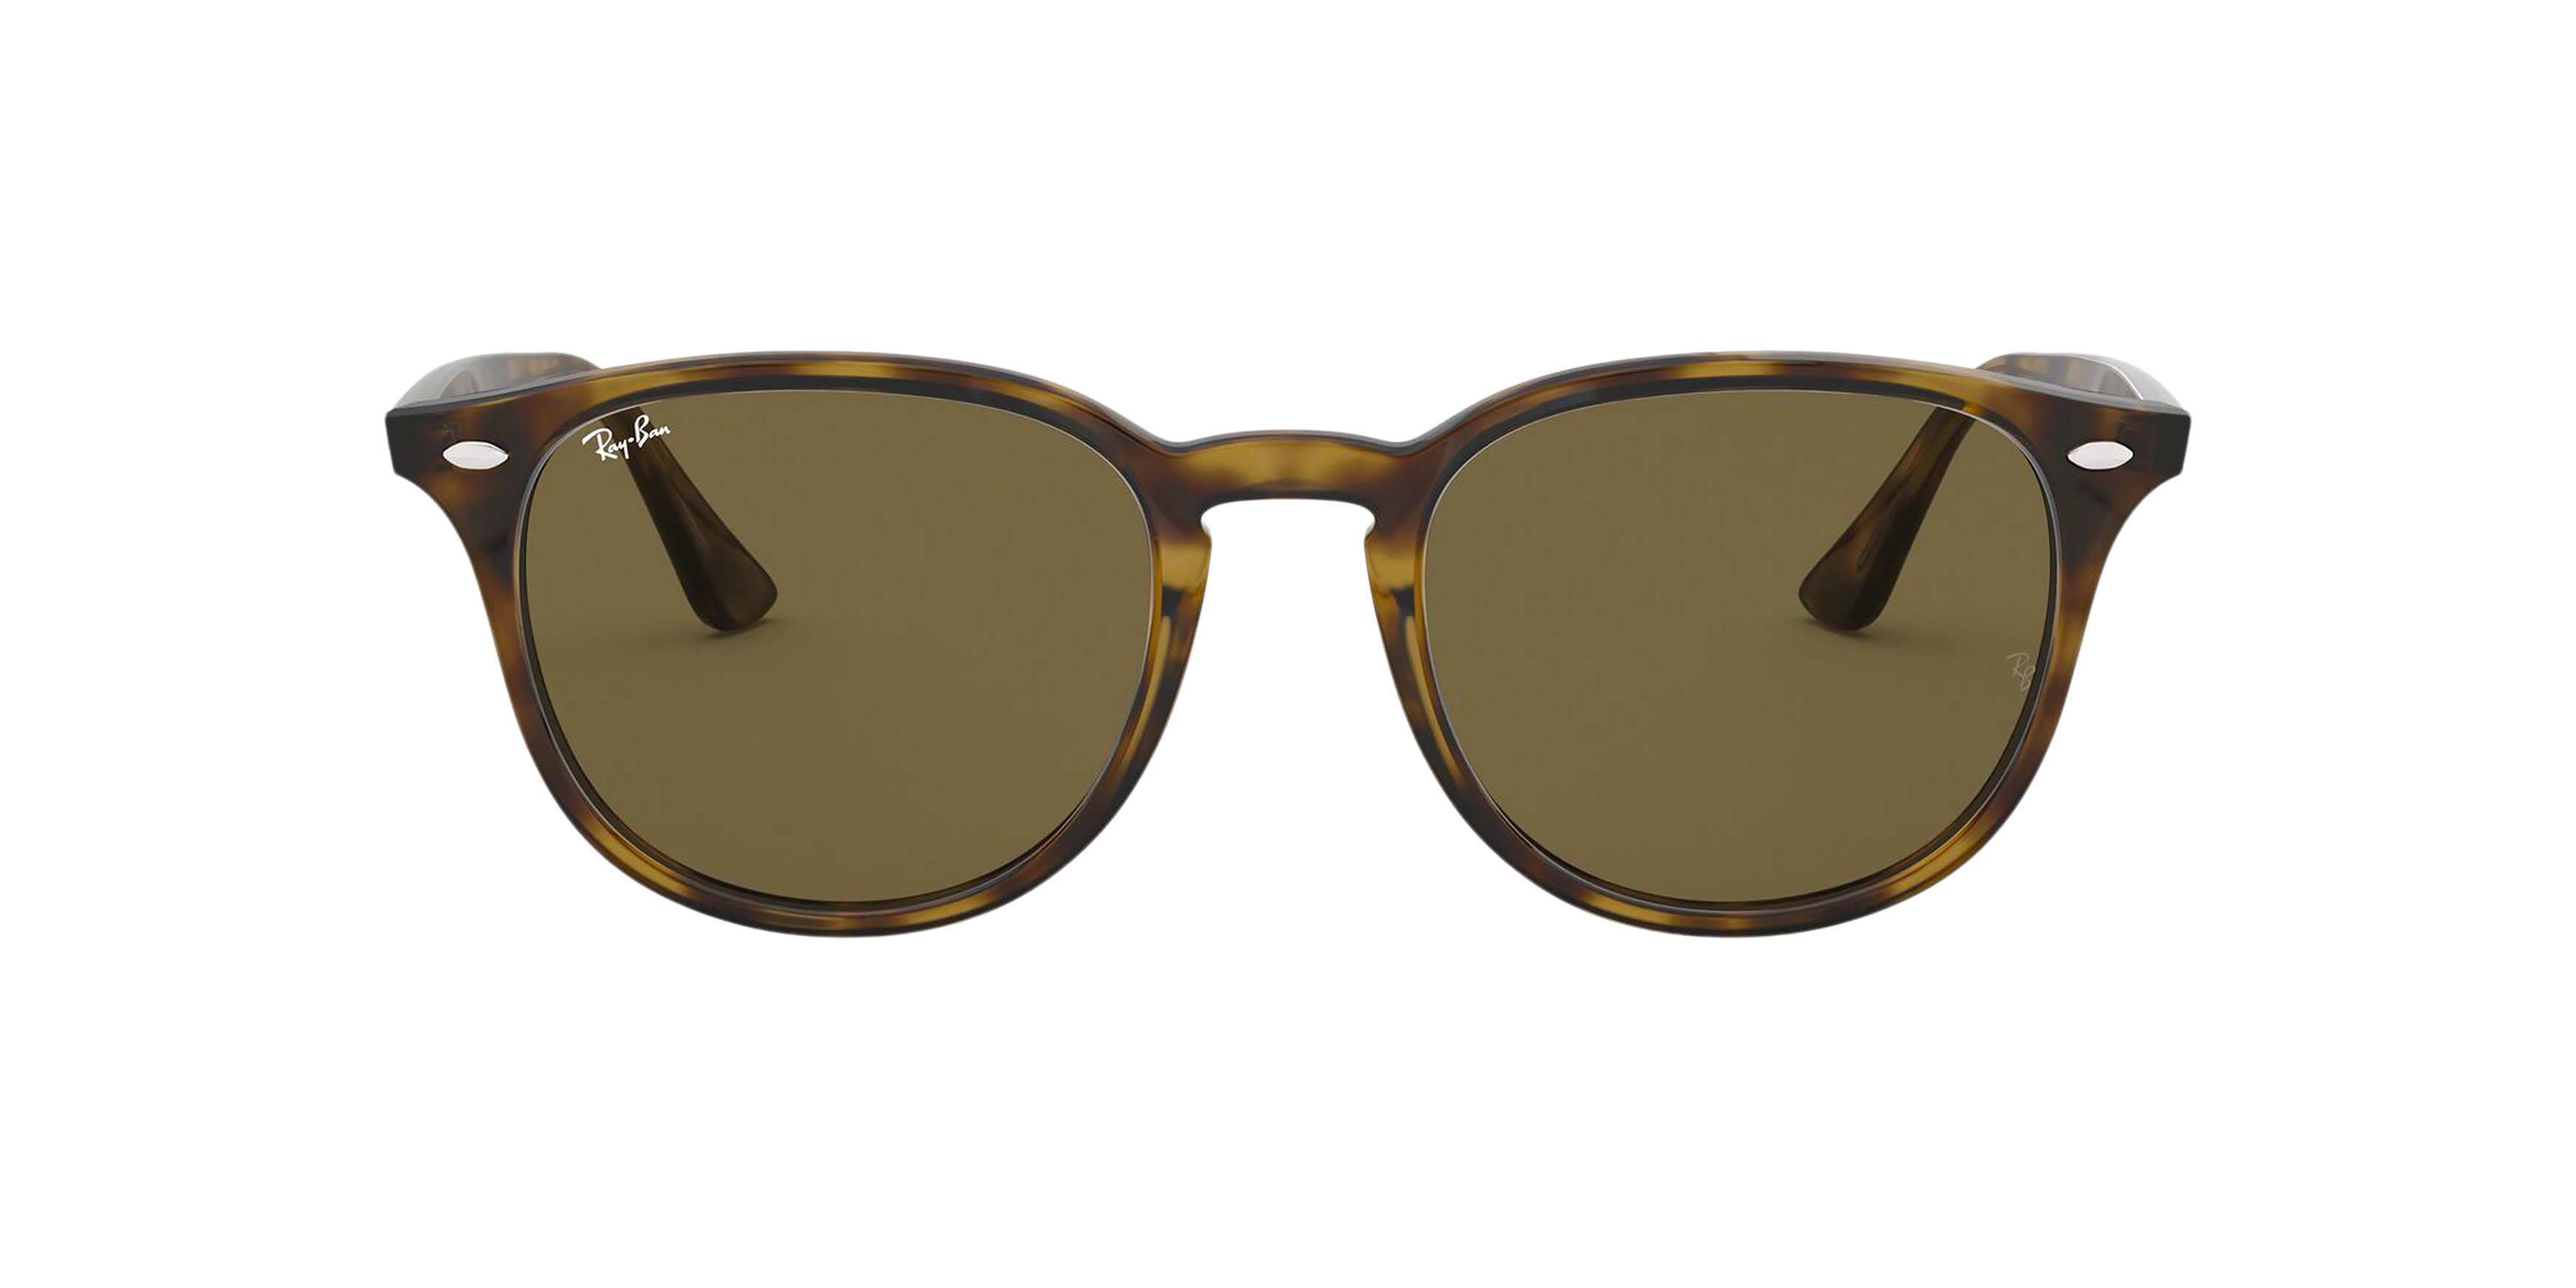 [products.image.front] RAY-BAN RB4259 710/73